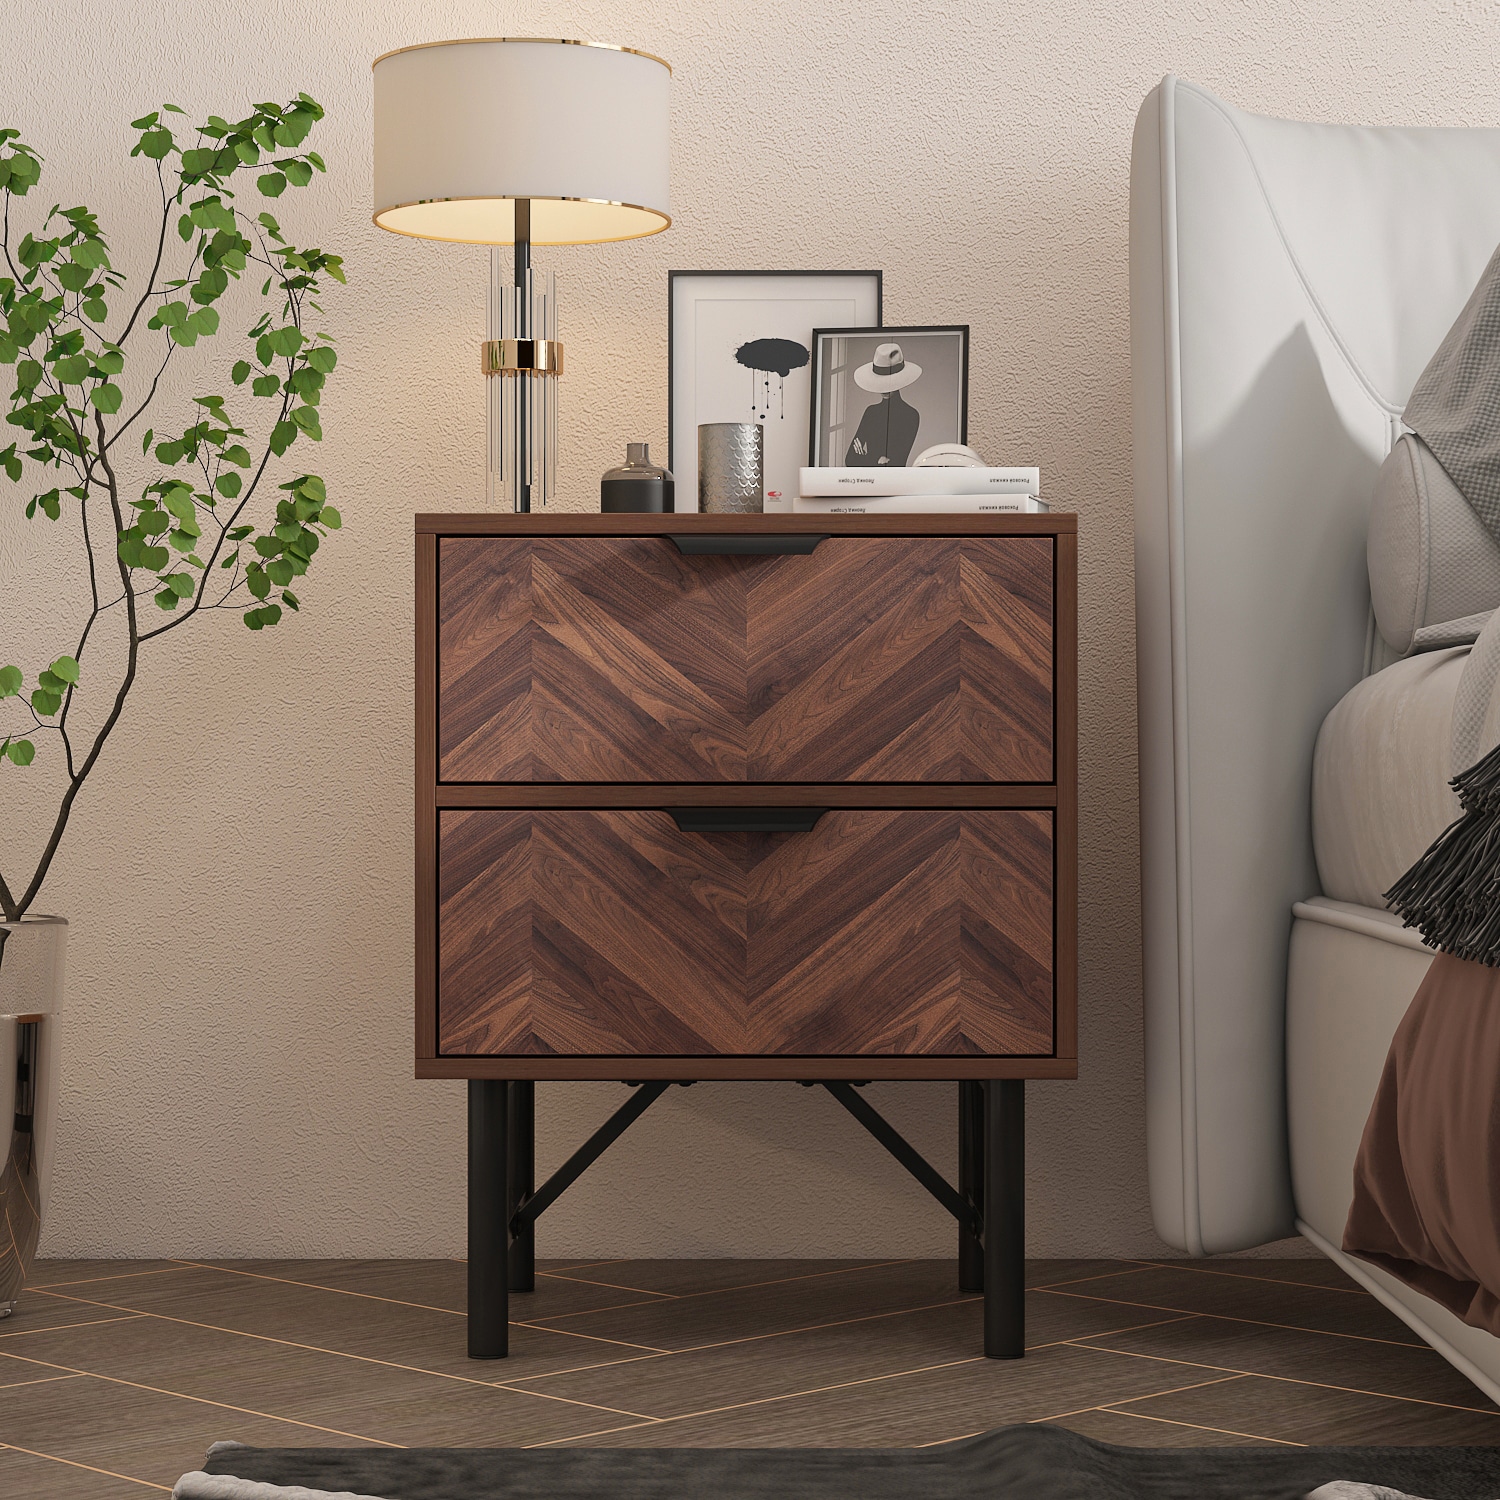 Prepac Transitional Espresso Nightstand with 2 Drawers - Sturdy  Construction, Antique Bronze Knobs, Dark Brown Finish